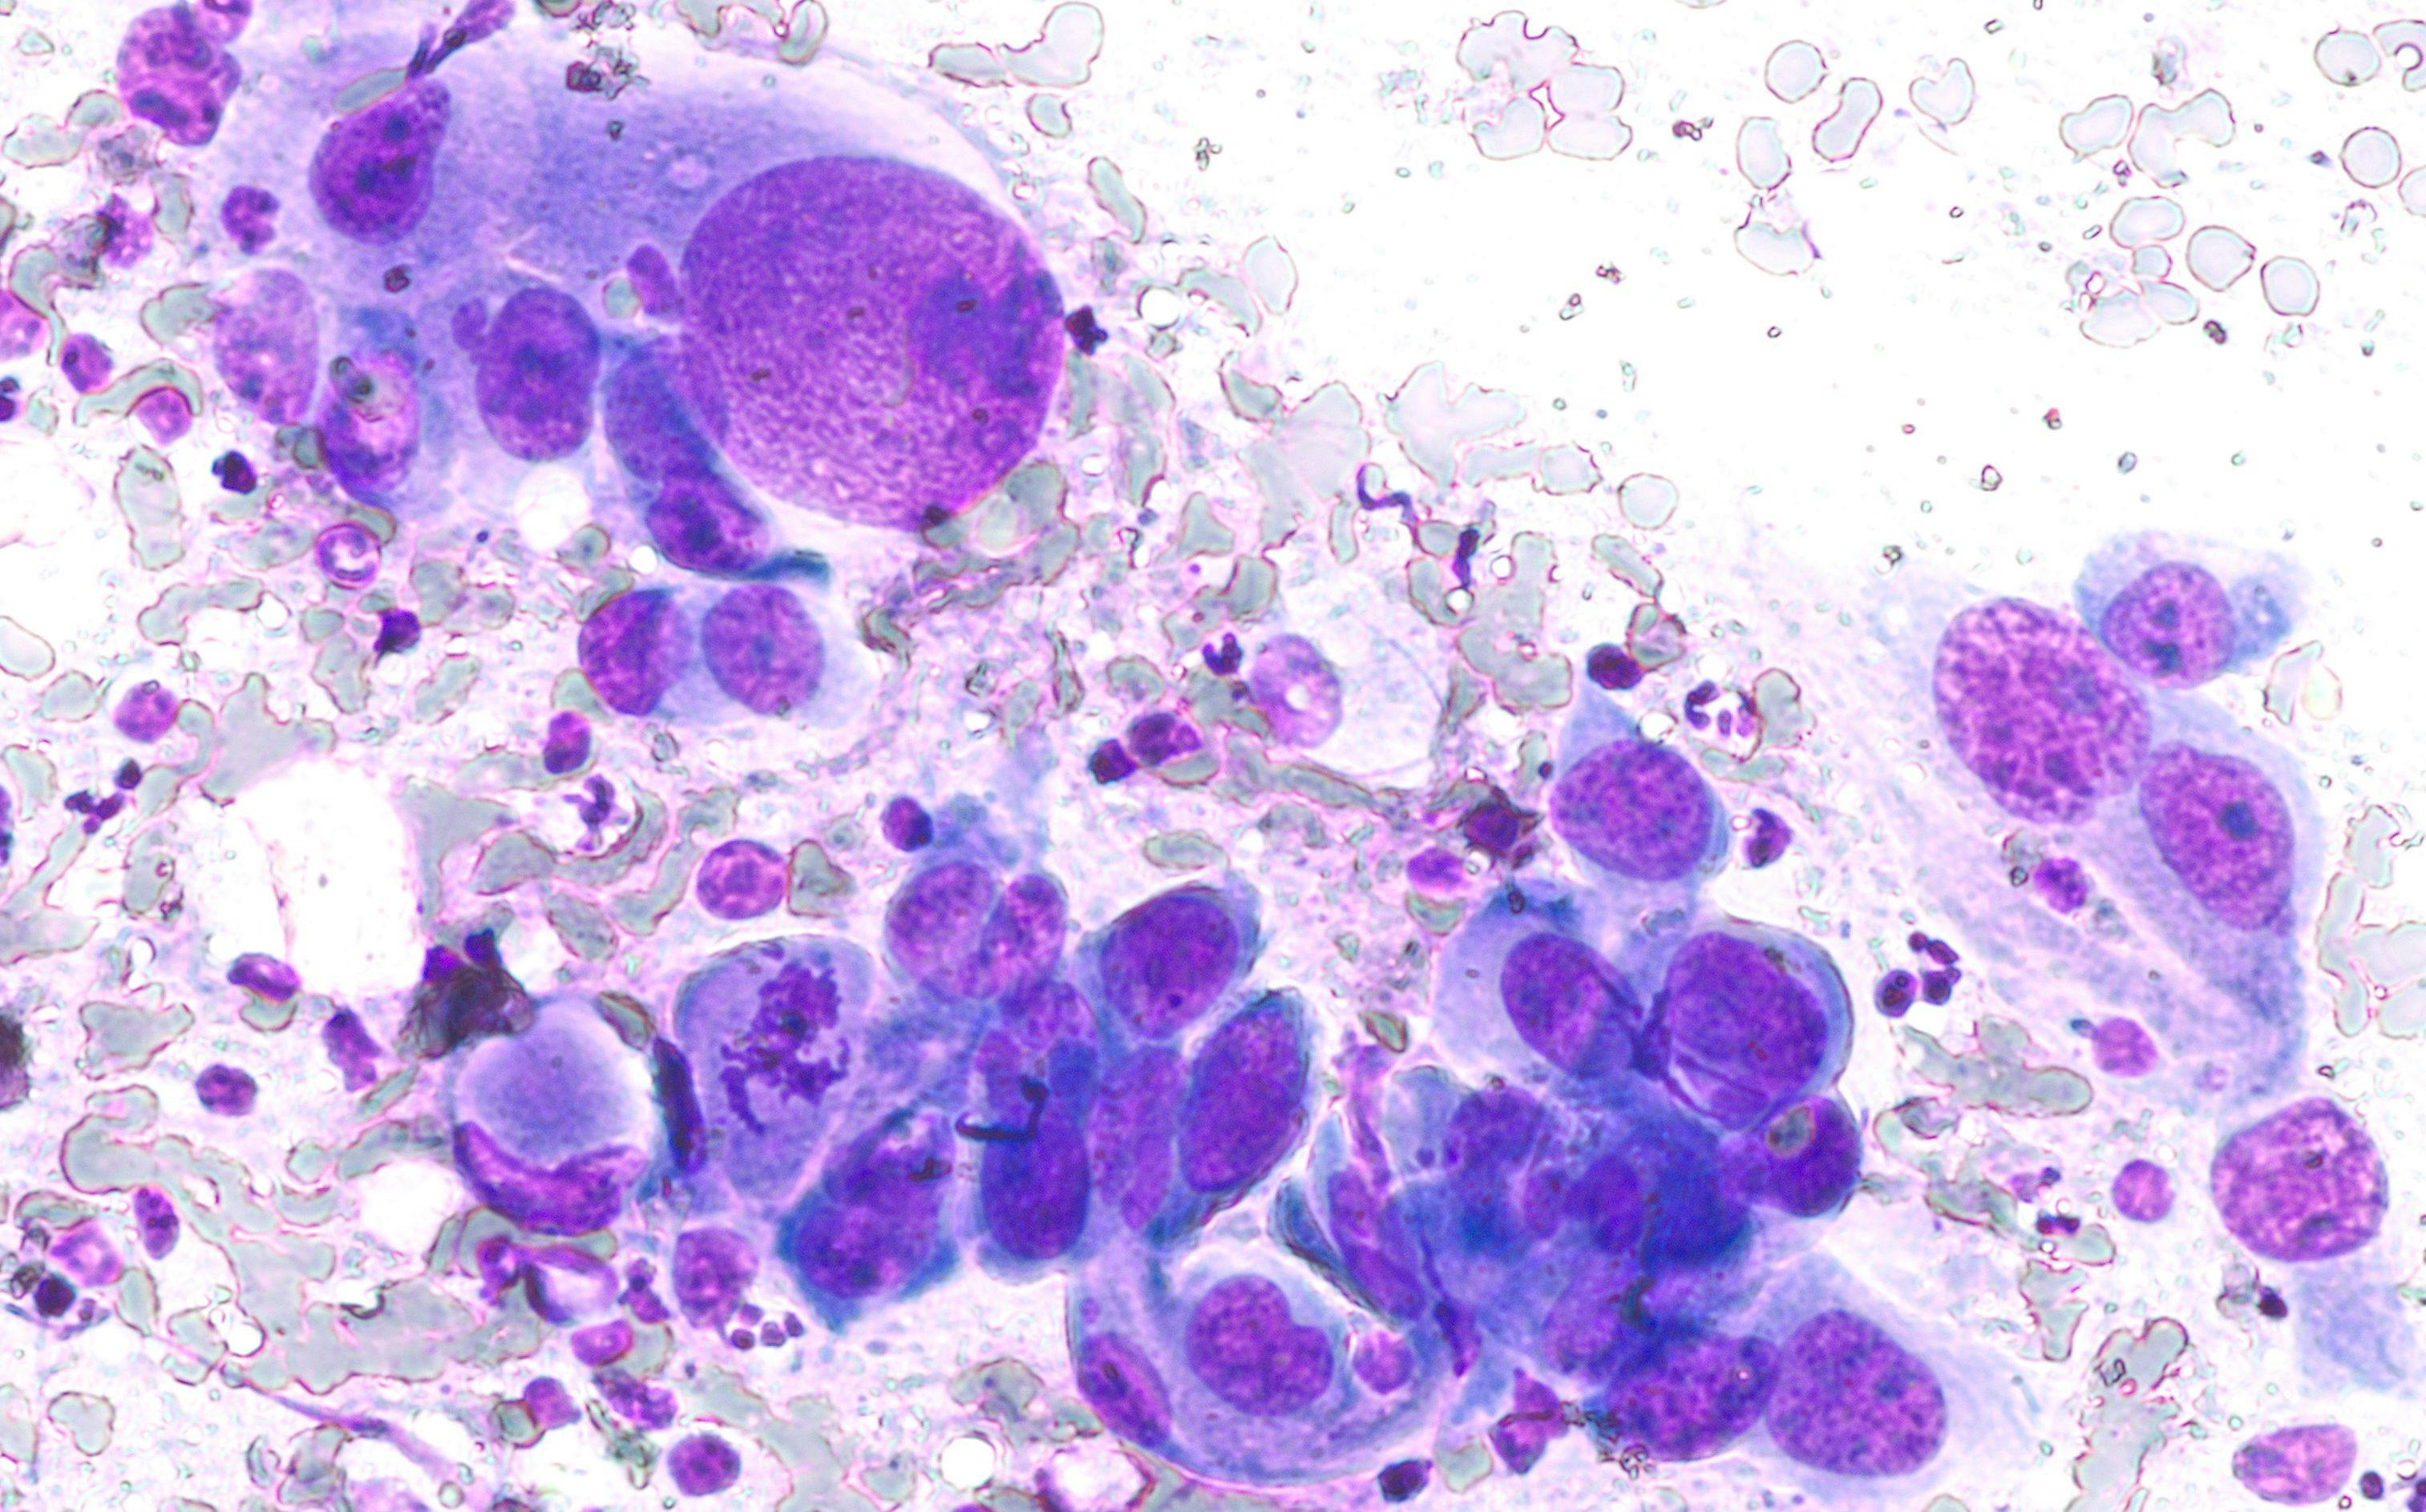 Phogomicrograph of fine needle aspiration (FNA) cytology of a pulmonary (lung) nodule showing adenocarcinoma, a type of non small cell carcinoma.| Image Credit: © David A Litman -www.stock.adobe.com